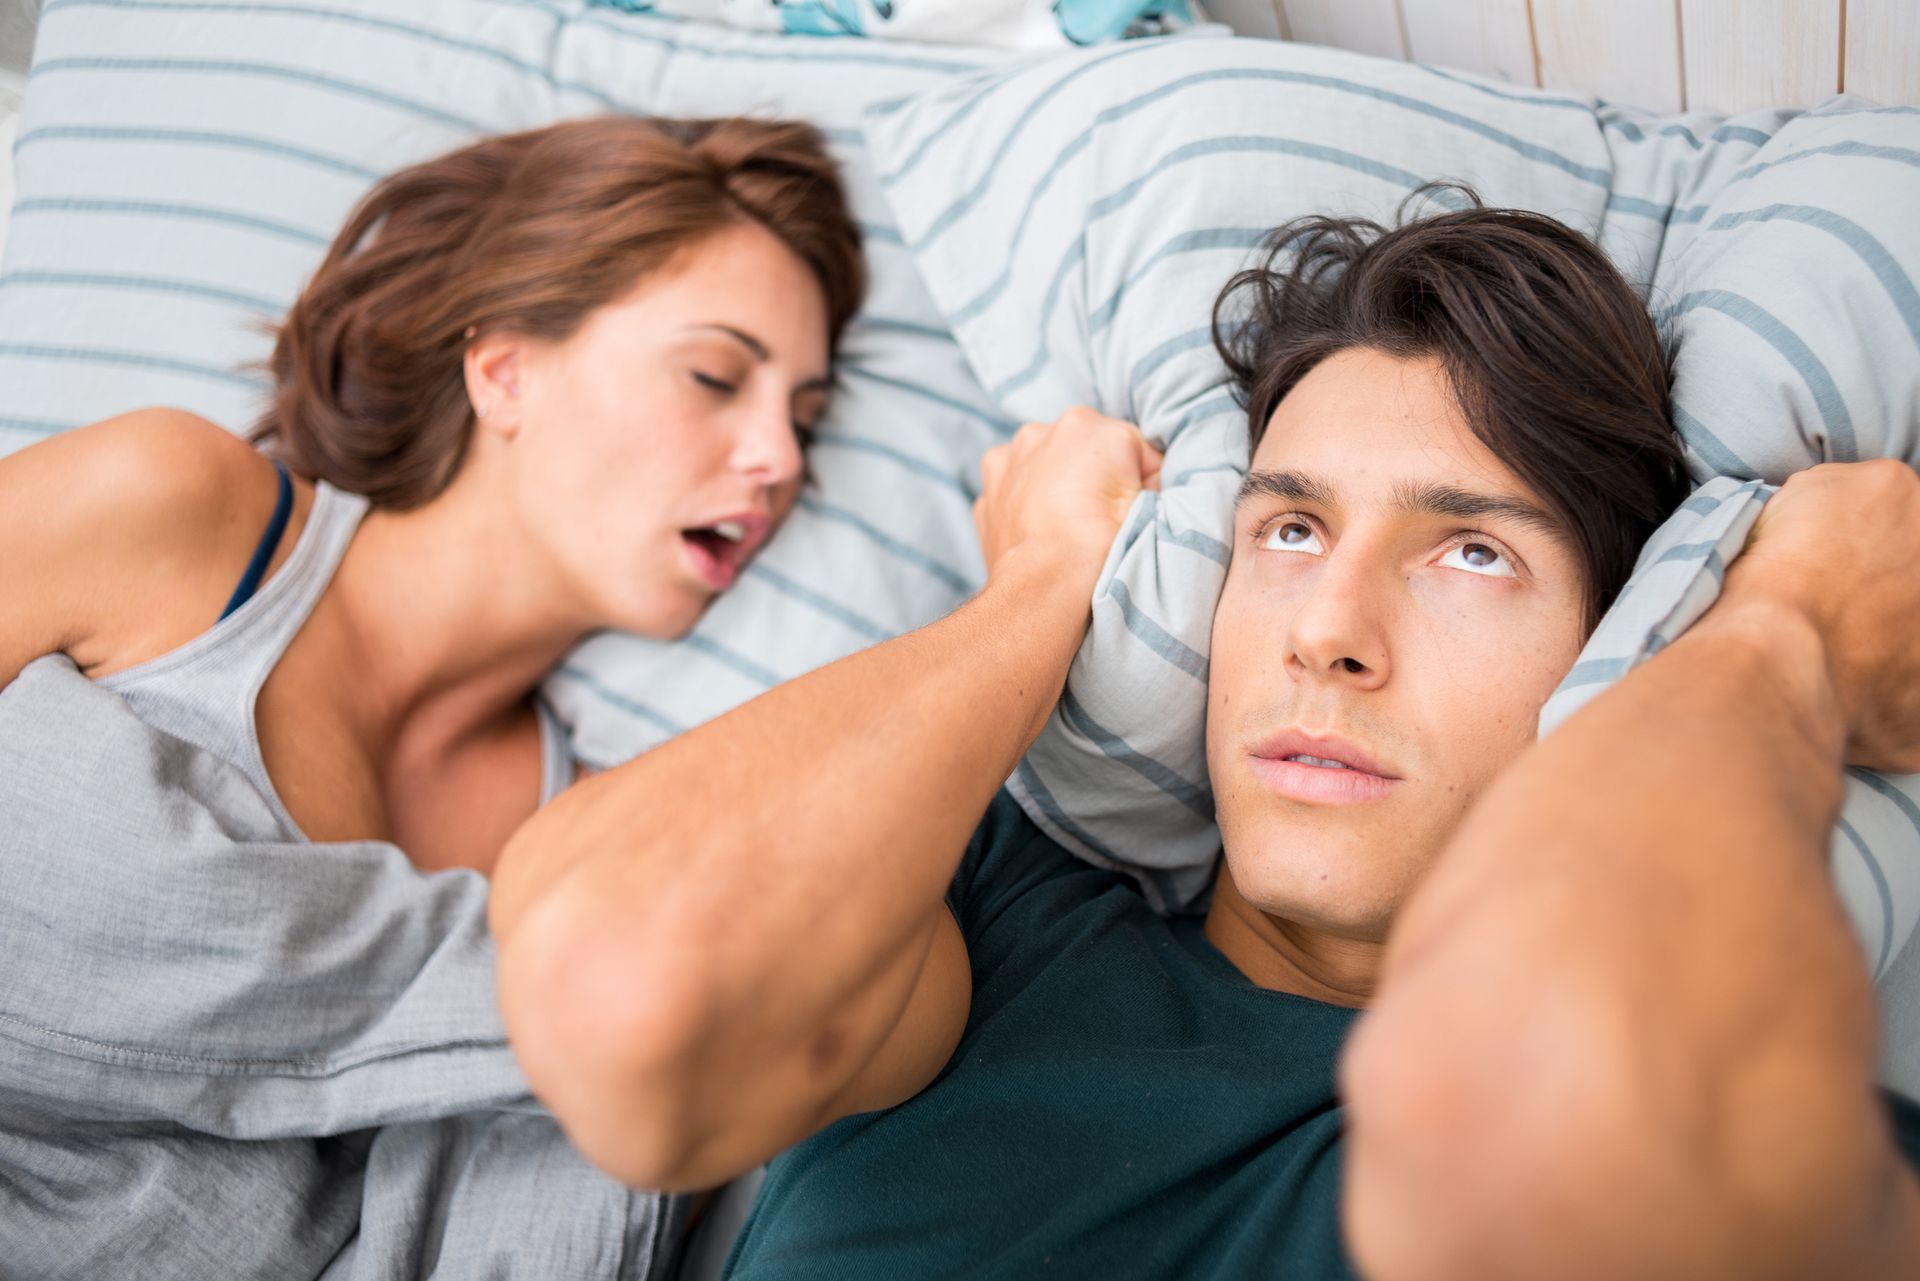 snoring woman with annoyed man